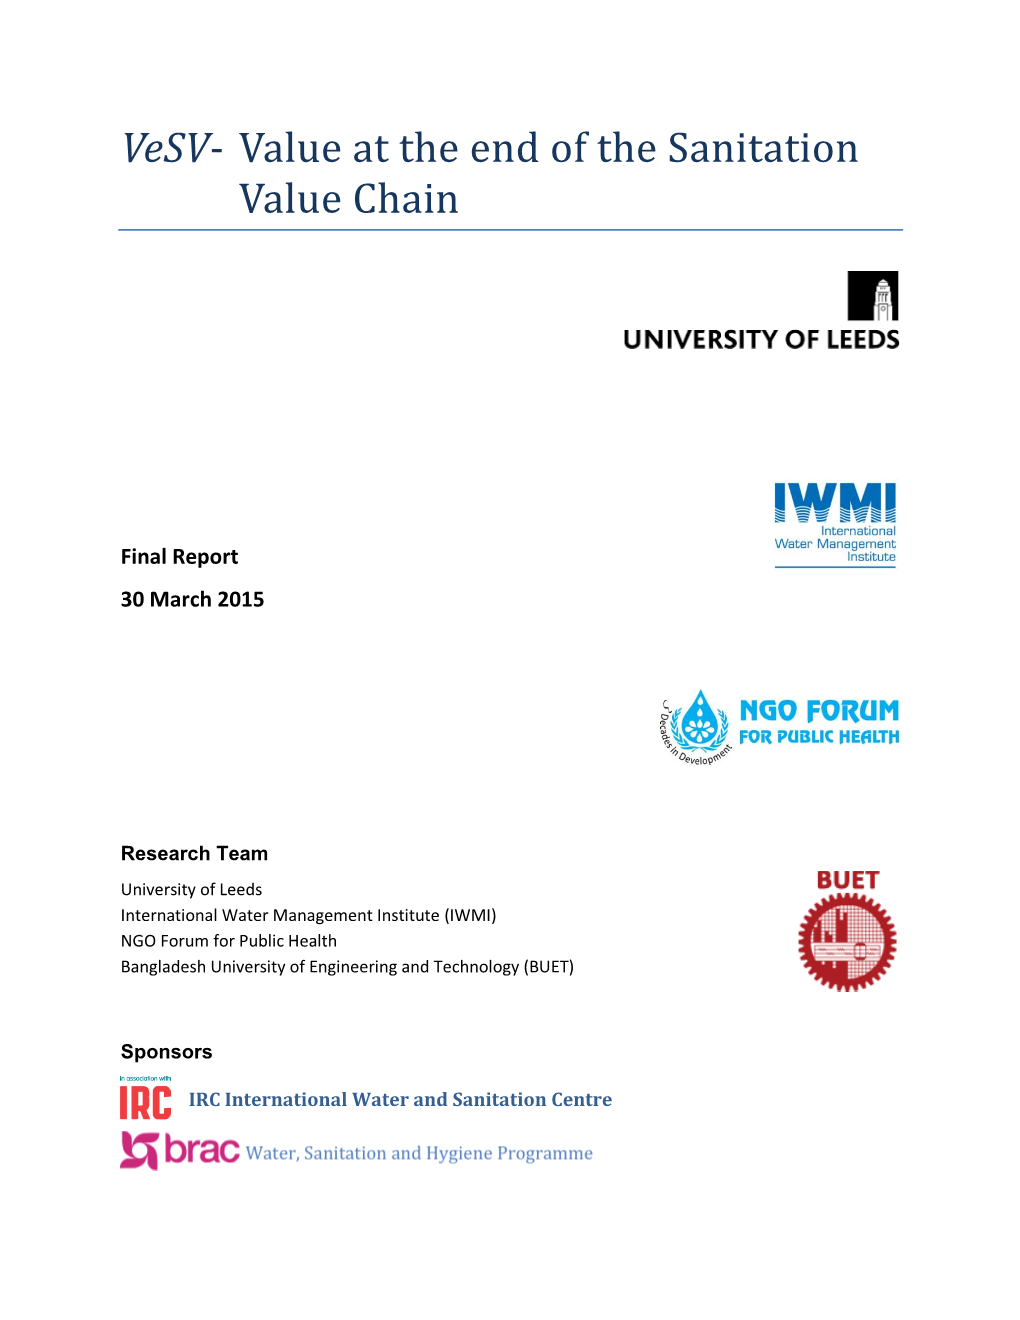 Vesv- Value at the End of the Sanitation Value Chain